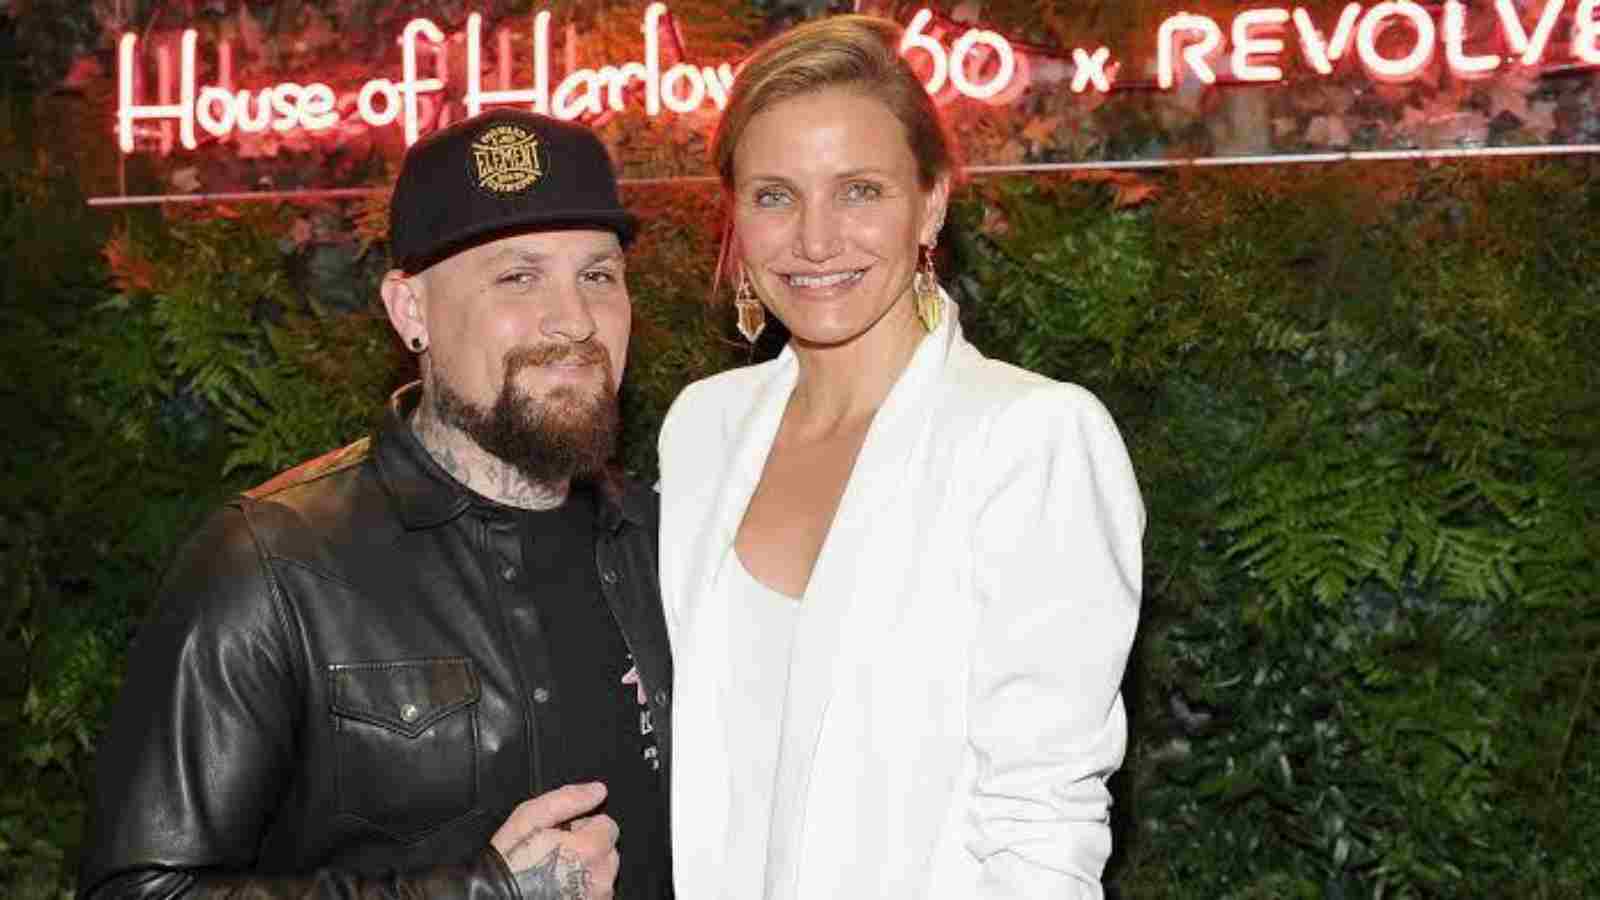 Here's the reason why Cameron Diaz retired